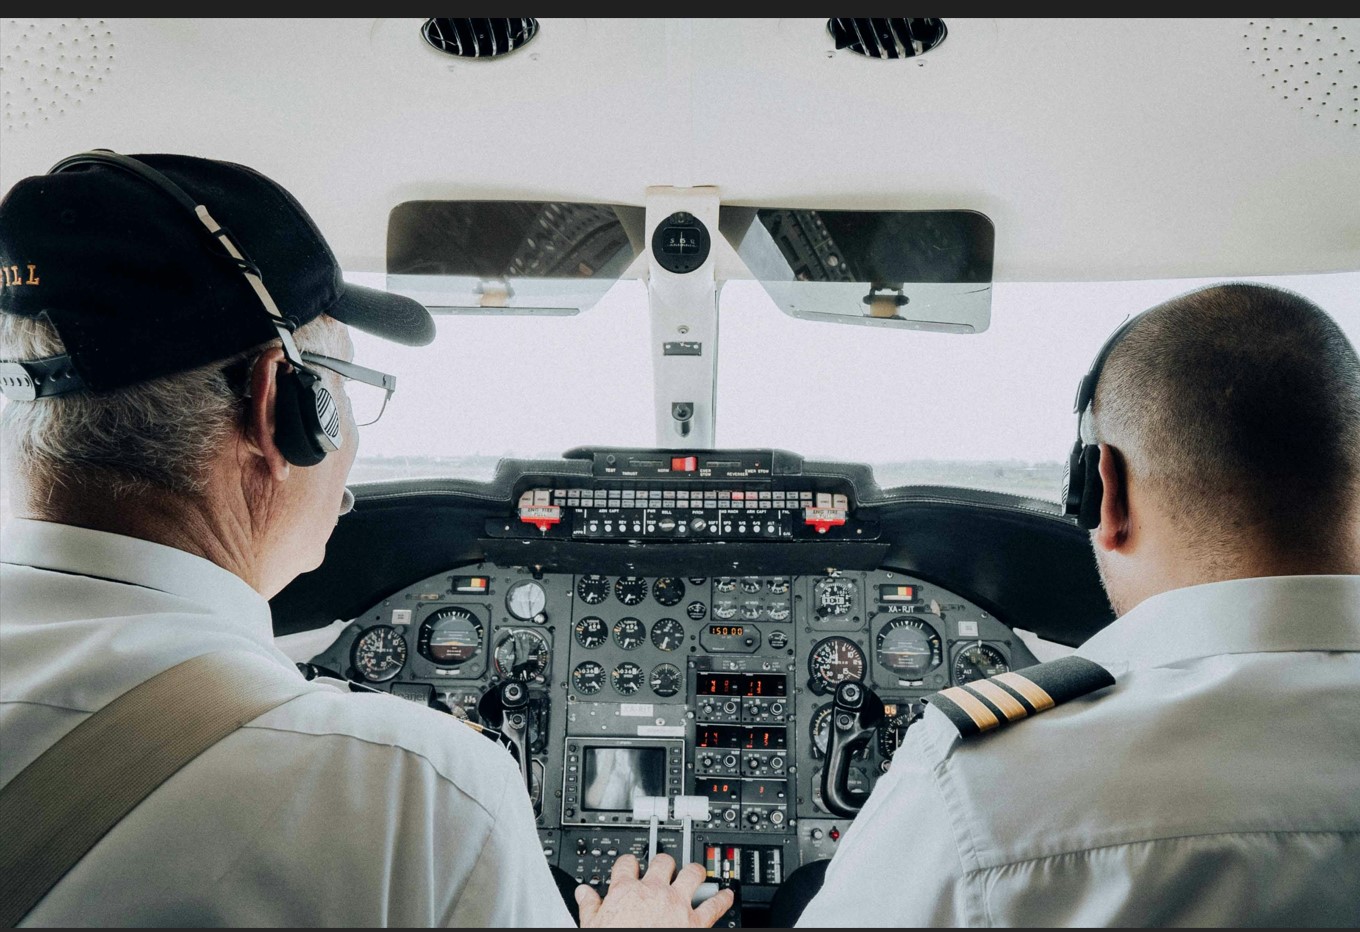 Pilots working in the aviation industry